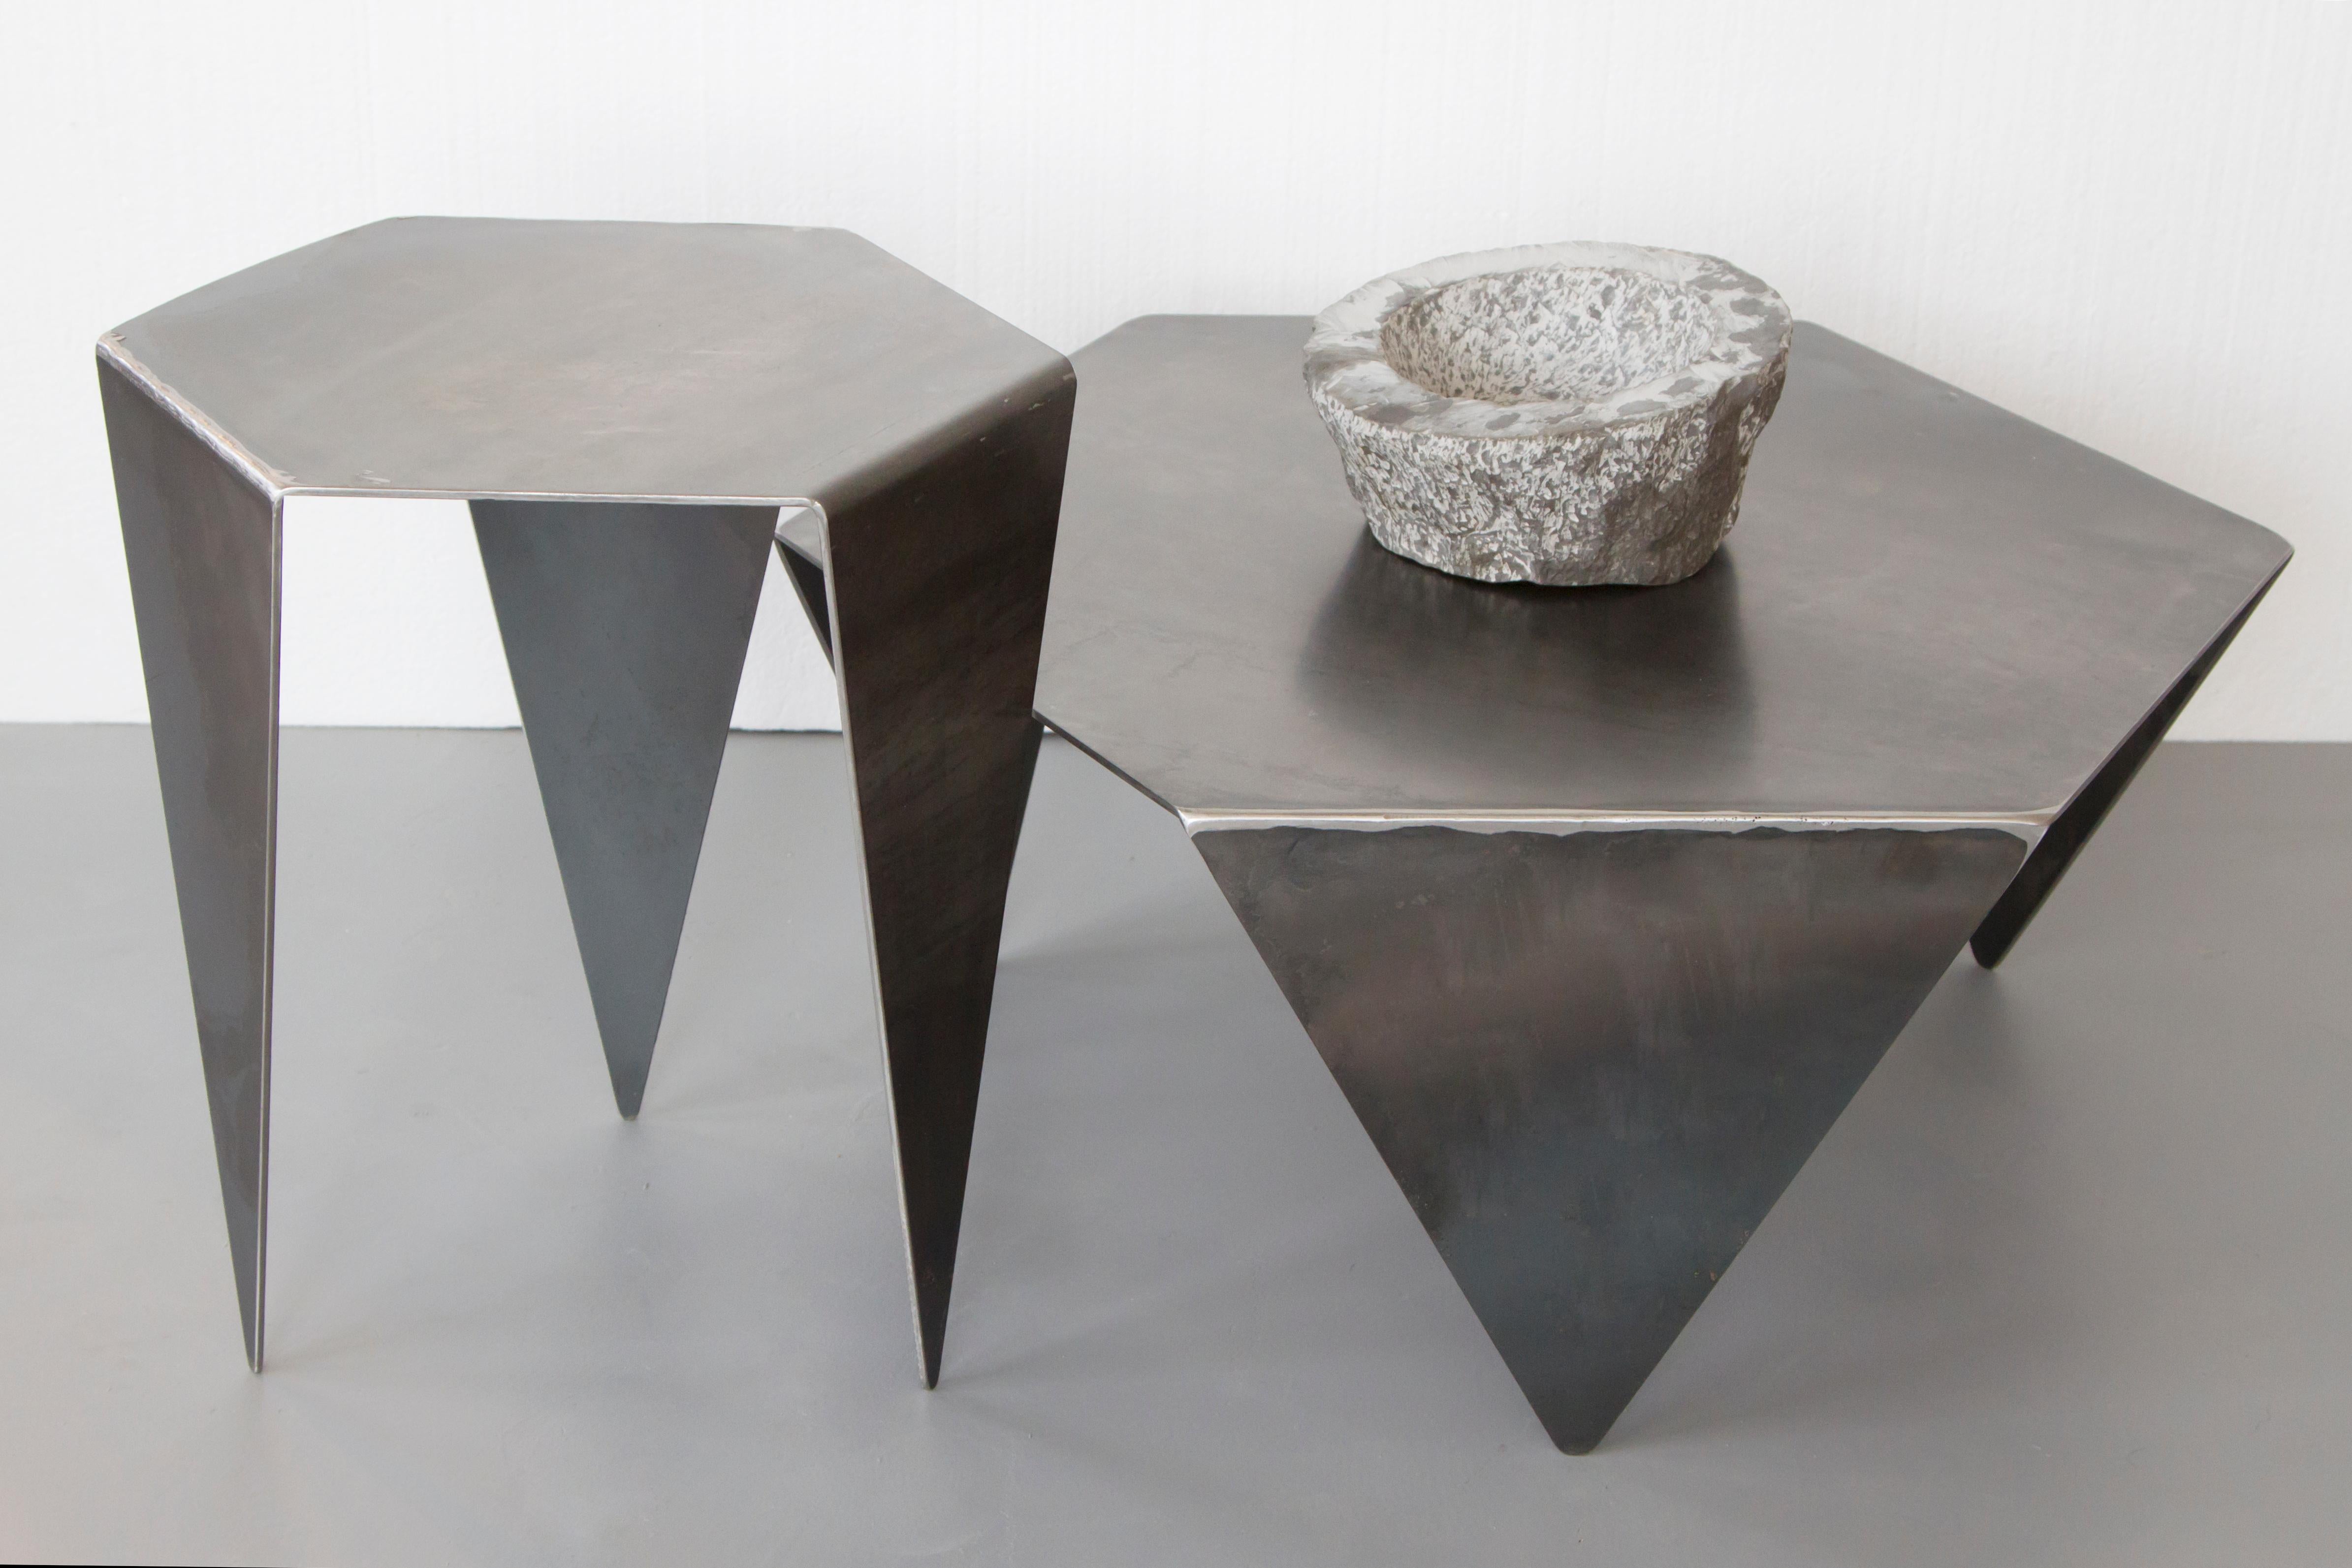 Canadian Hexagon Side Table in Raw Black Steel Minimalist Design by Mtharu For Sale